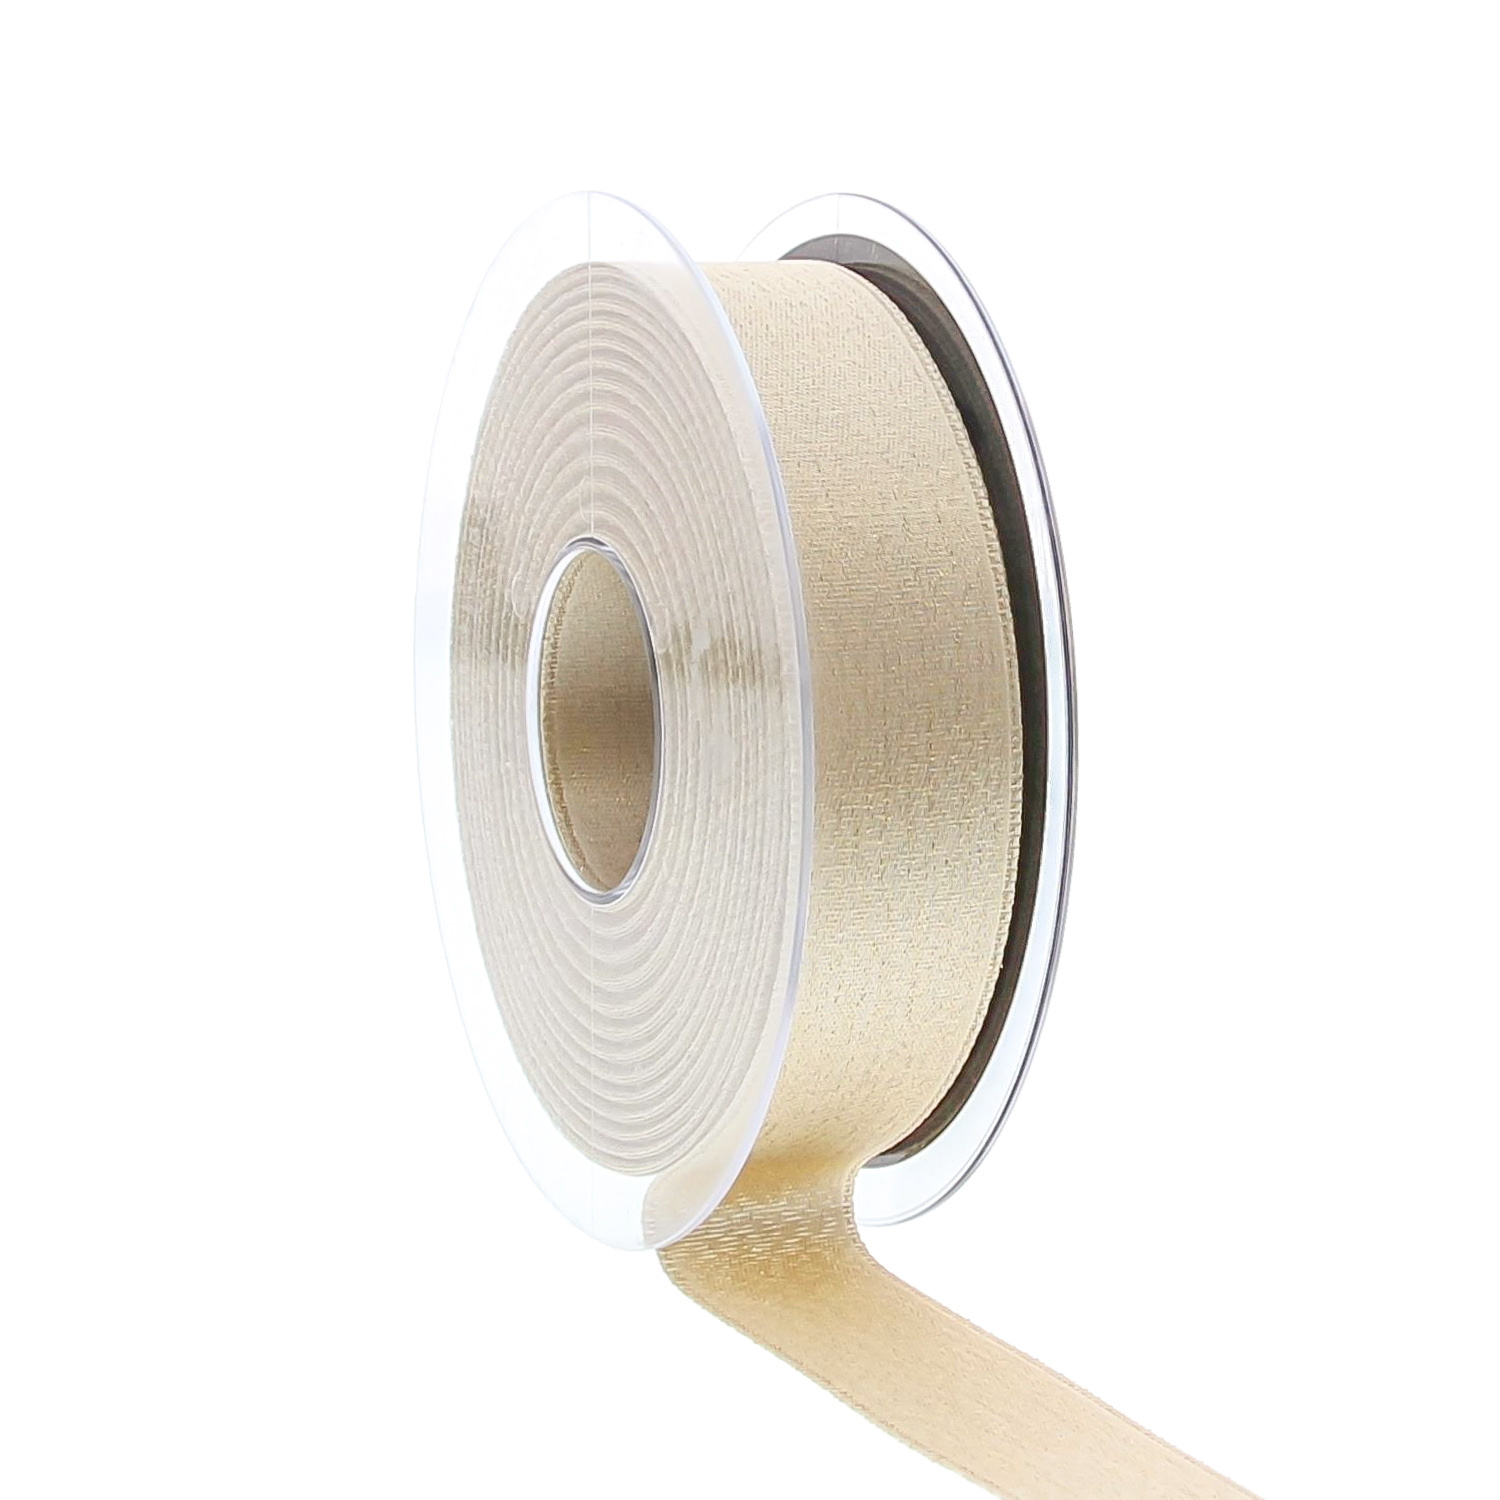 Band Shimmer Weisses - Gold -25mm x 20mtr